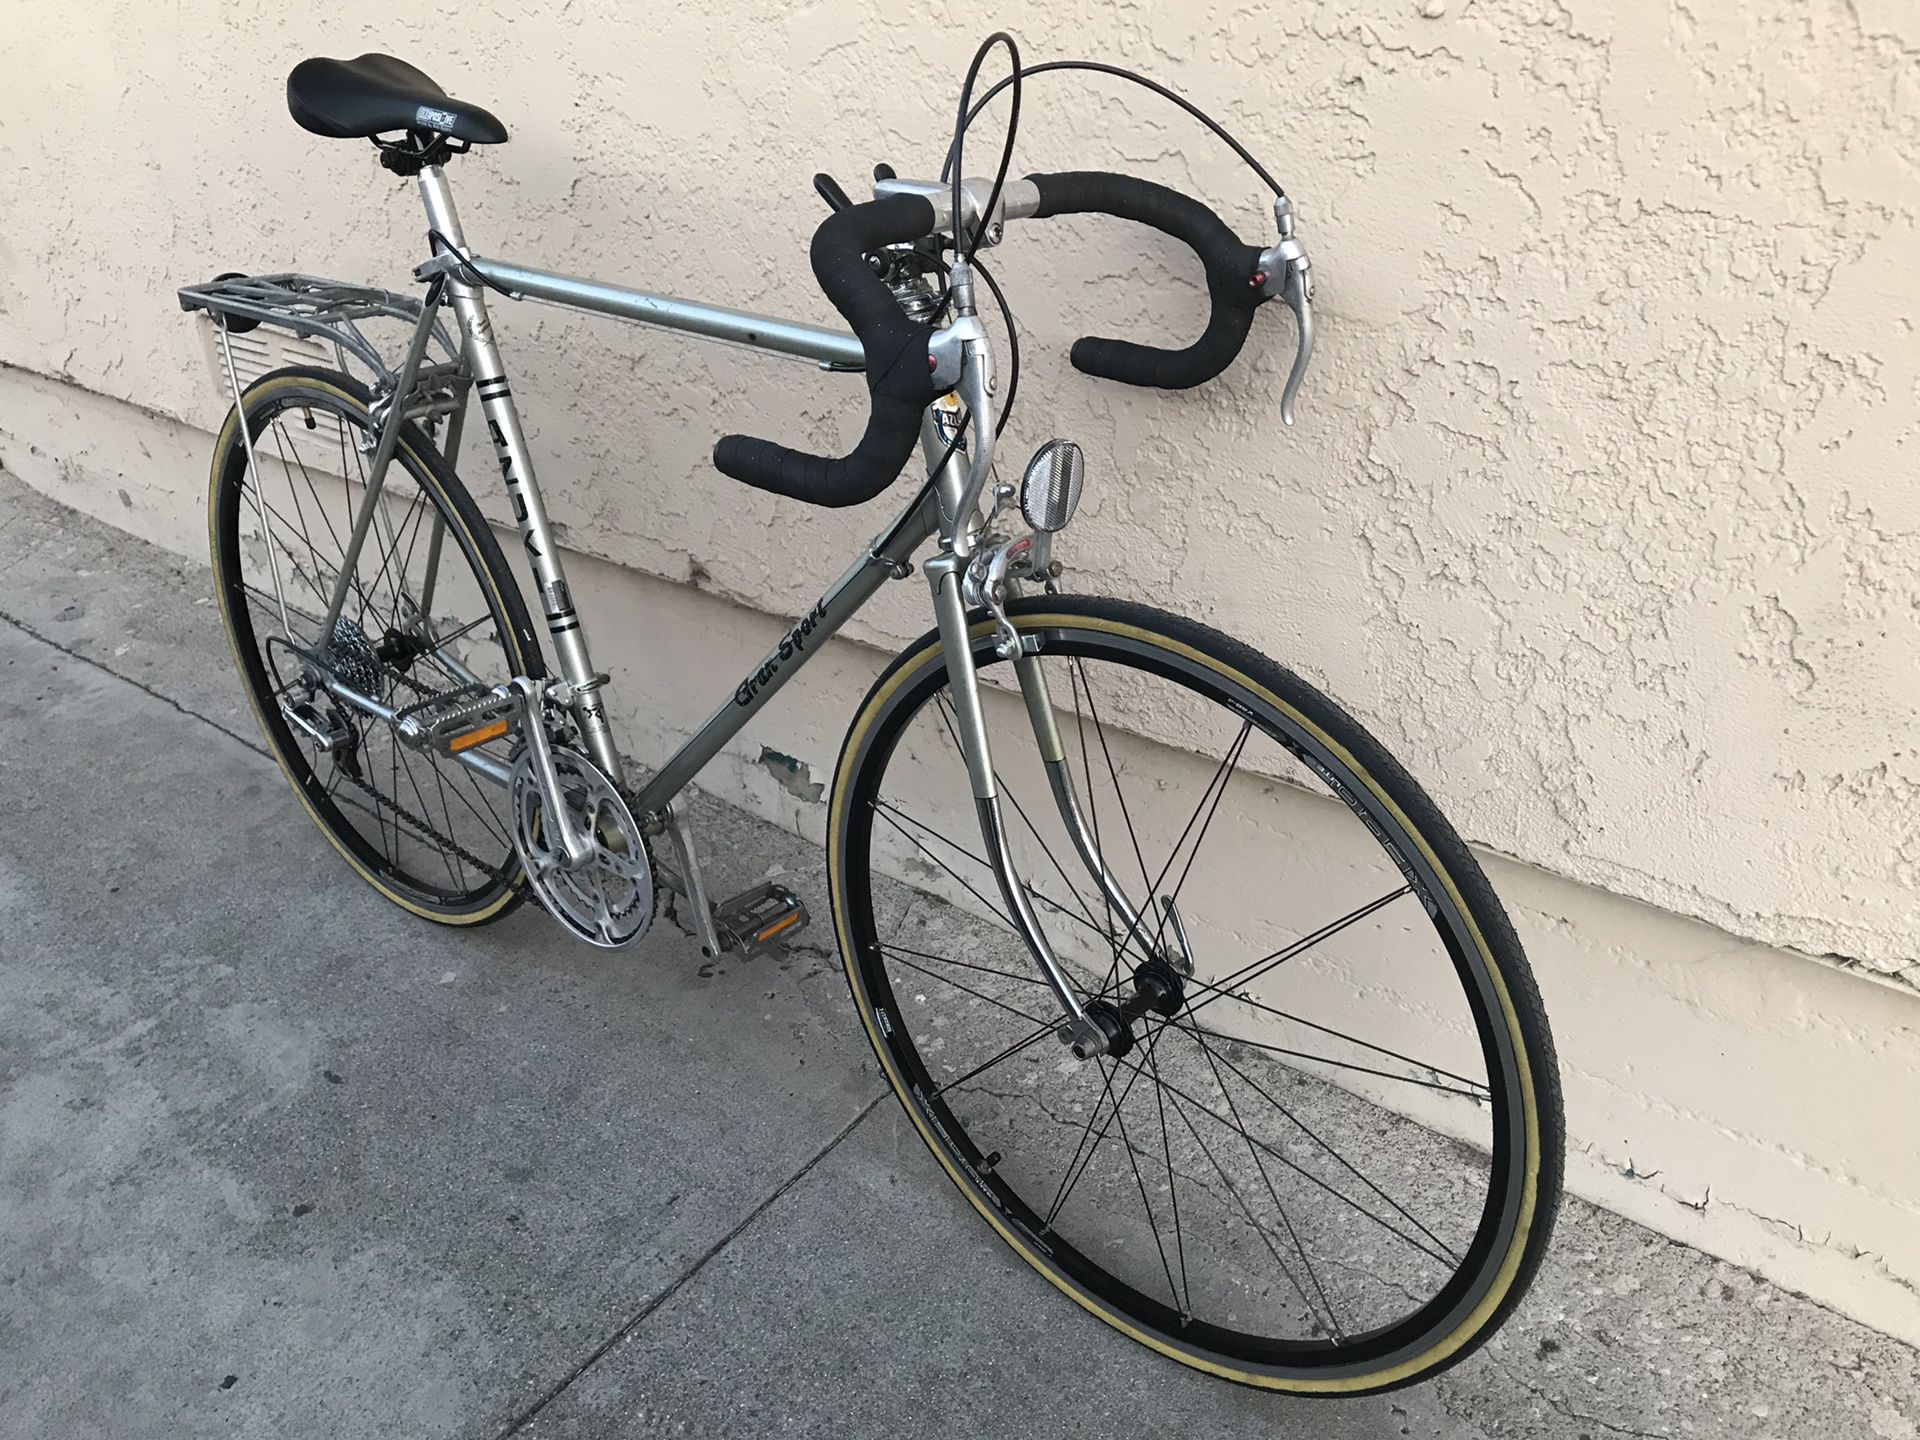 Vintage road bike/ excellent working condition/ just tuned / rims were upgraded to new style 700c